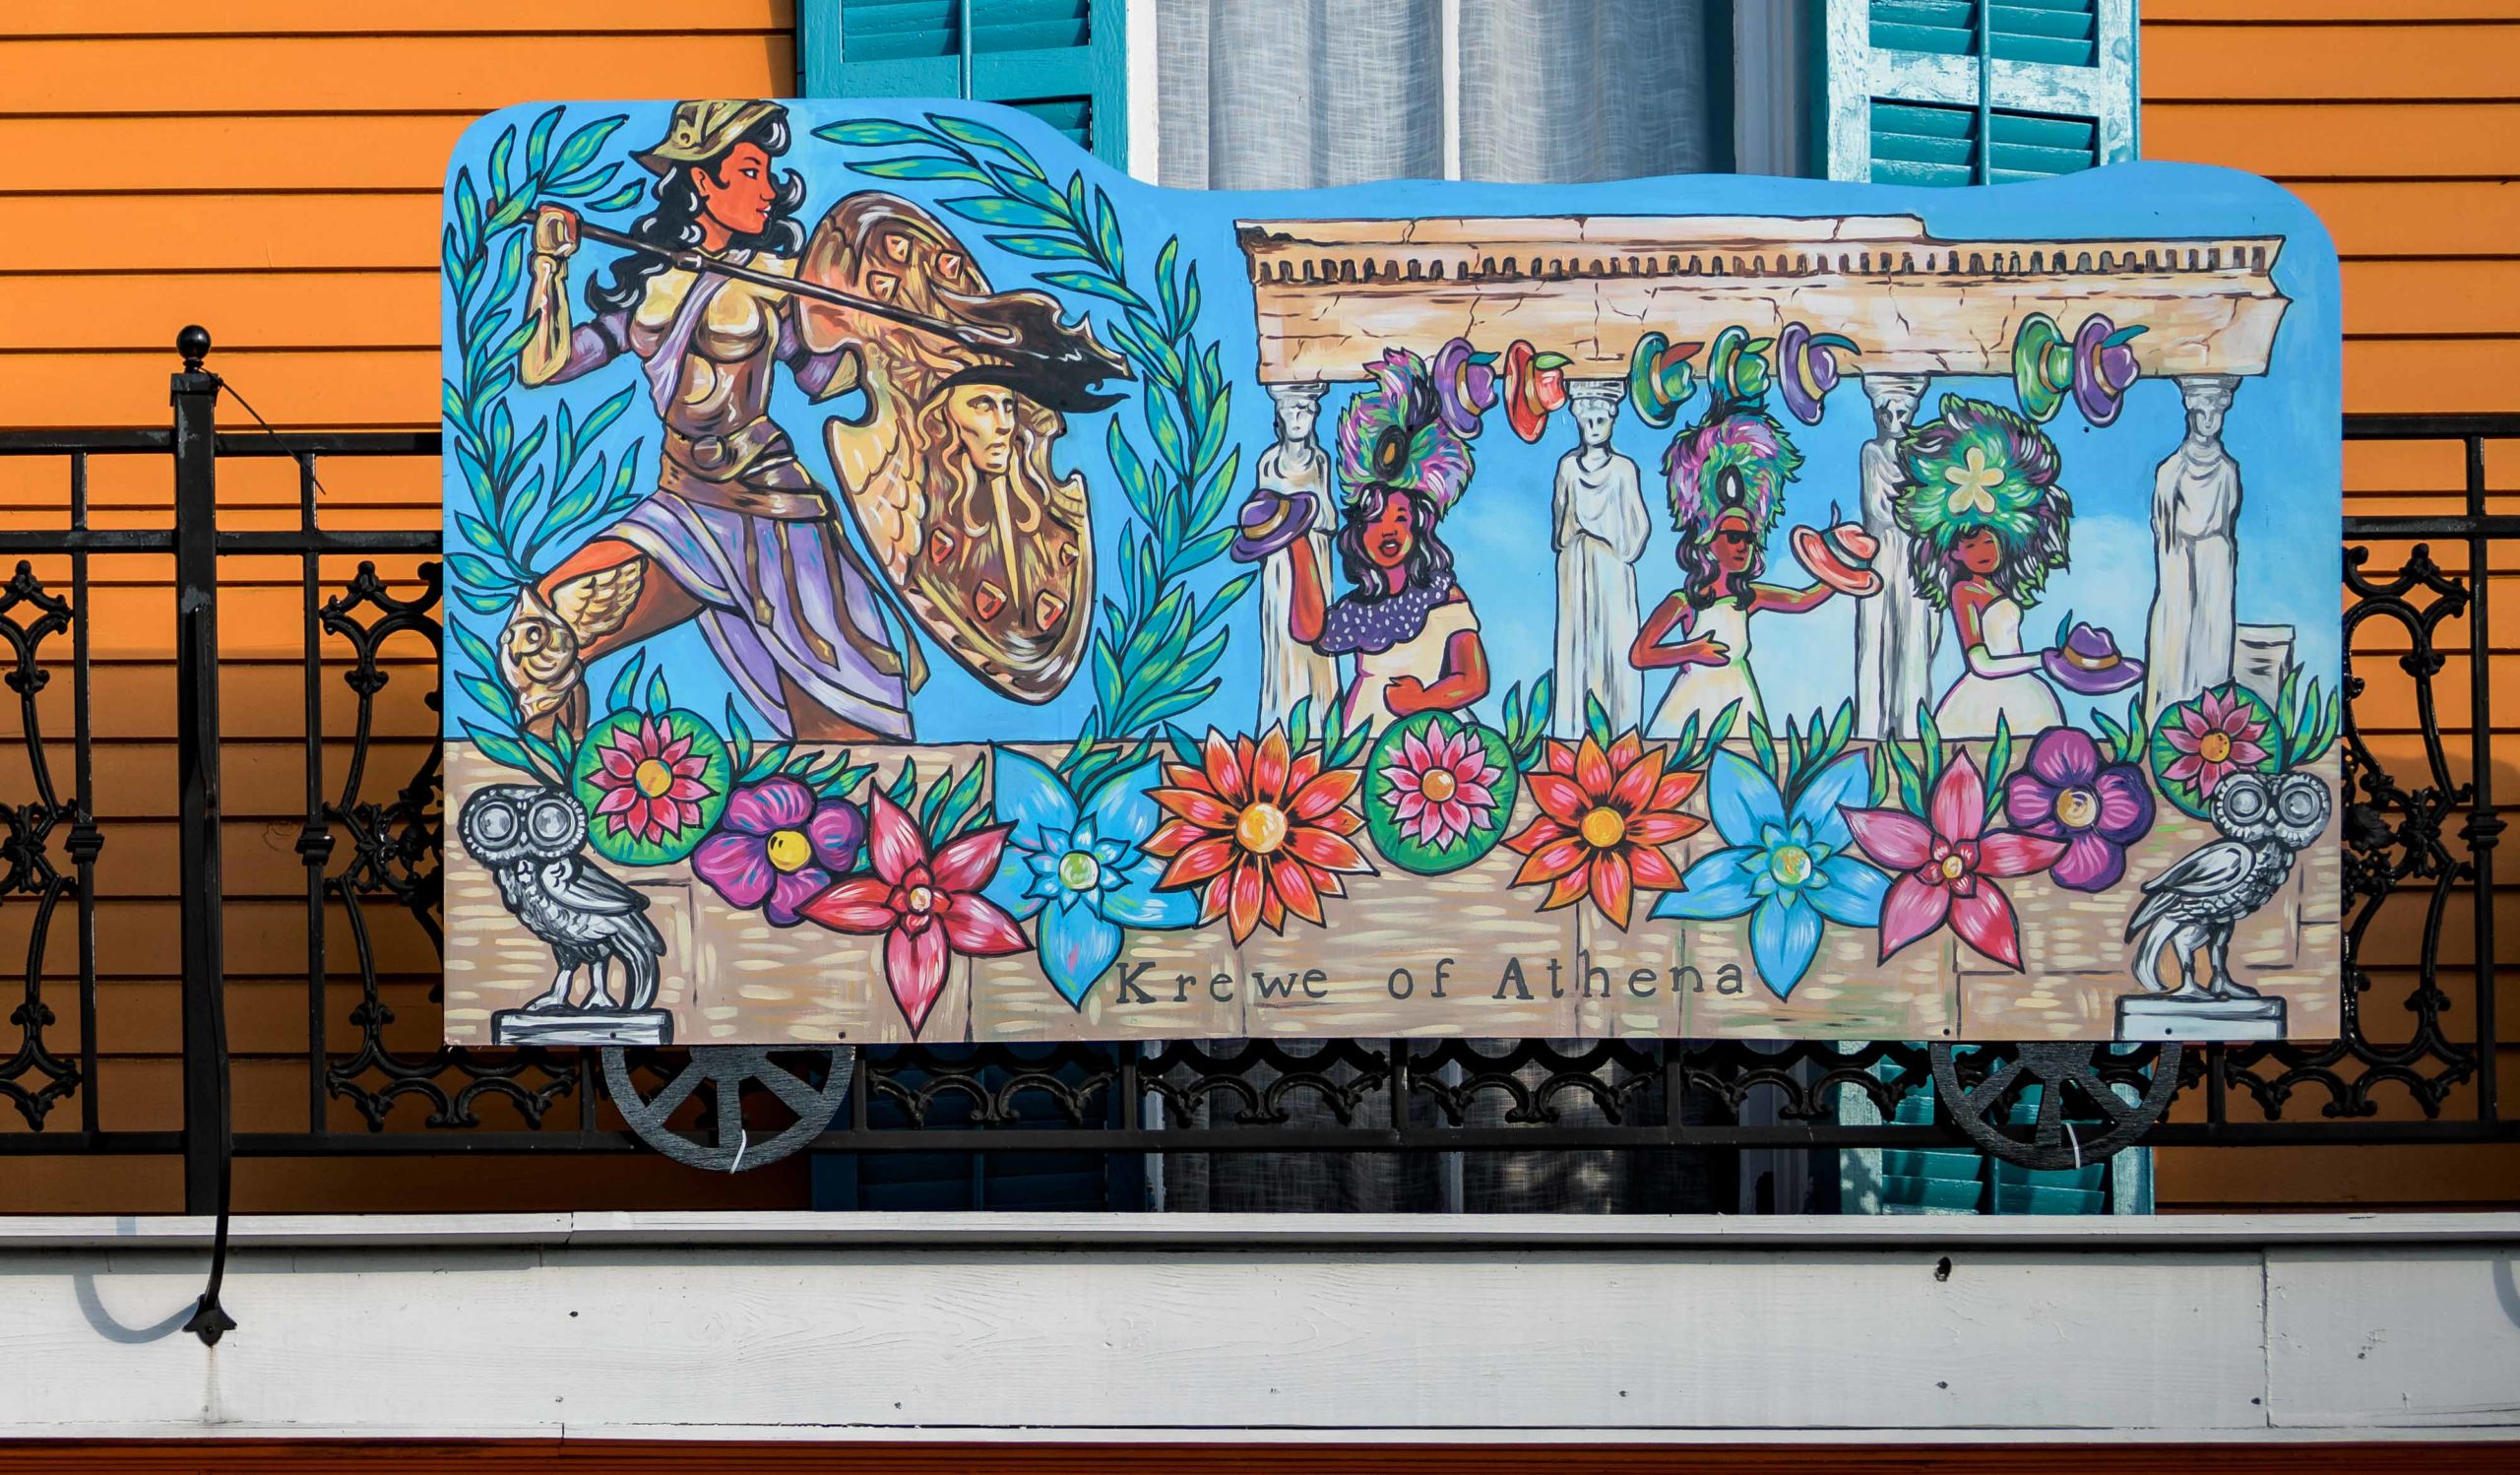 The Stronghold Studios, @strongholdstudios, a New Orleans entertainment display and prop company, has created a full Carnival parade house float on the balcony @The_Marigny_Stoop seen here on Sunday, January 16, 2022. Formerly the home to the American Baking Co. in the early 1900s, the house on 2501 Chartres St has been painted a bright orange by Dr. Maurice Sholas. The adult themed Krewe du Vieux passes by the home and Sholas hosts the “Doc Mo Sho’s Krewe du Vieux Extravaganza” along the parade route. The Marigny House Float balcony includes a styrofoam painted sculpture of Monogram Hunters Second Chief Jeremy Stevenson, and painted boards of Mardi Gras floats from the Zulu Social and Pleasure Club and the Rex Organization, and floats from female Carnival krewes including the Mystic Krewe of Femme Fatale, the Krewe of Athena, and the shoe-decorating Krewe of Muses. The house float tradition began last year in 2021 when Mardi Gras was canceled due to the COVID-19 pandemic. Hopefully there will be a Mardi Gras this year with actual floats, but if not there will be plenty of house floats to drive past at a safe social distance. Photo by Matthew Hinton